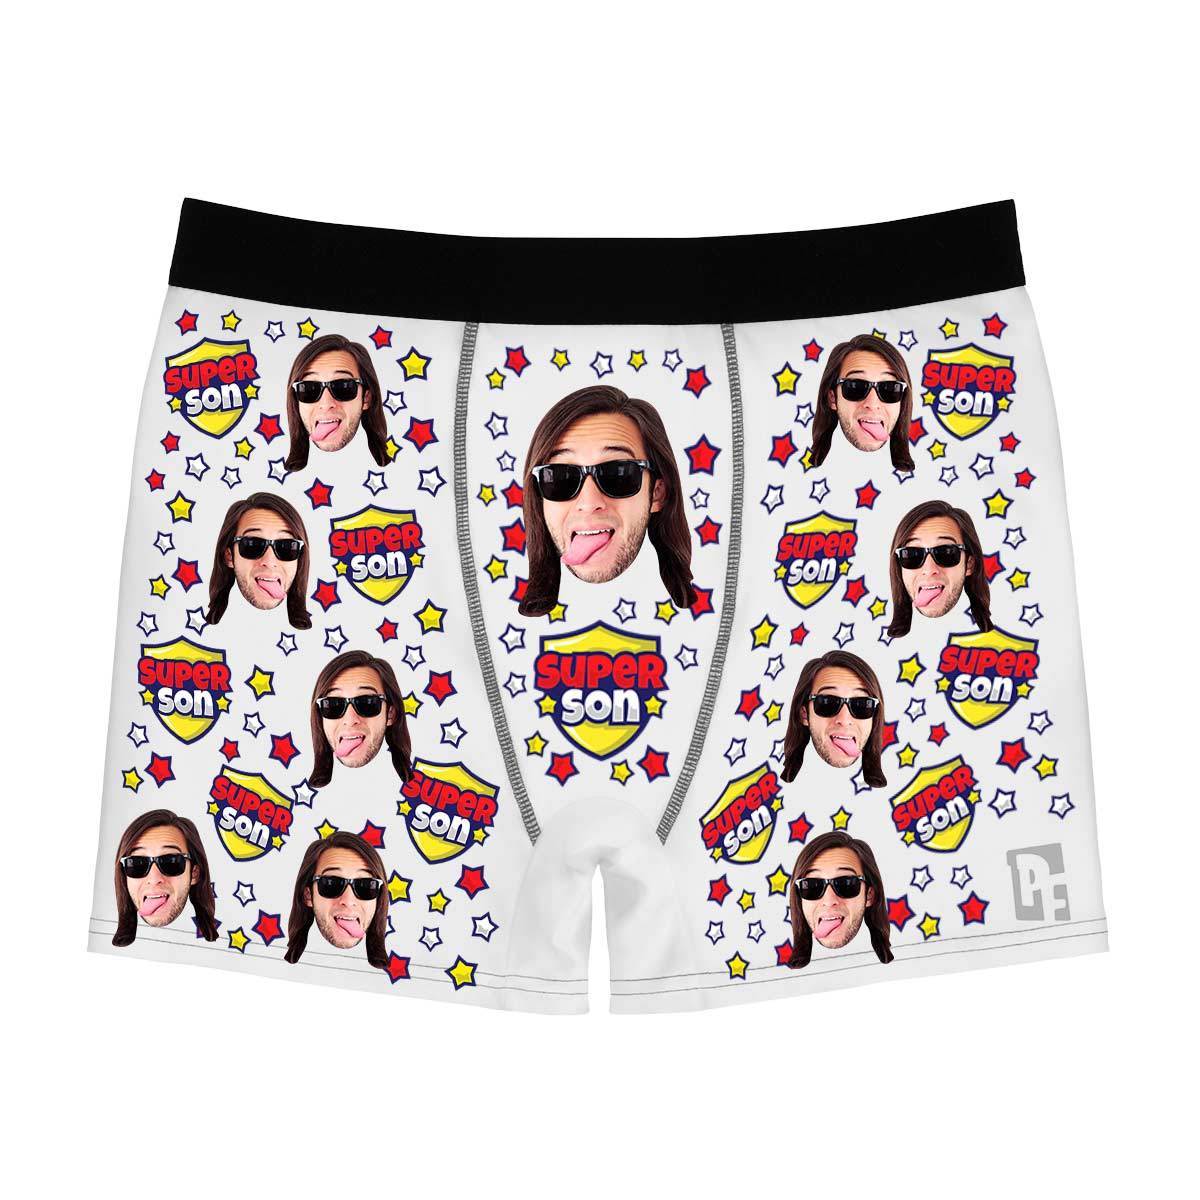 White Super son men's boxer briefs personalized with photo printed on them